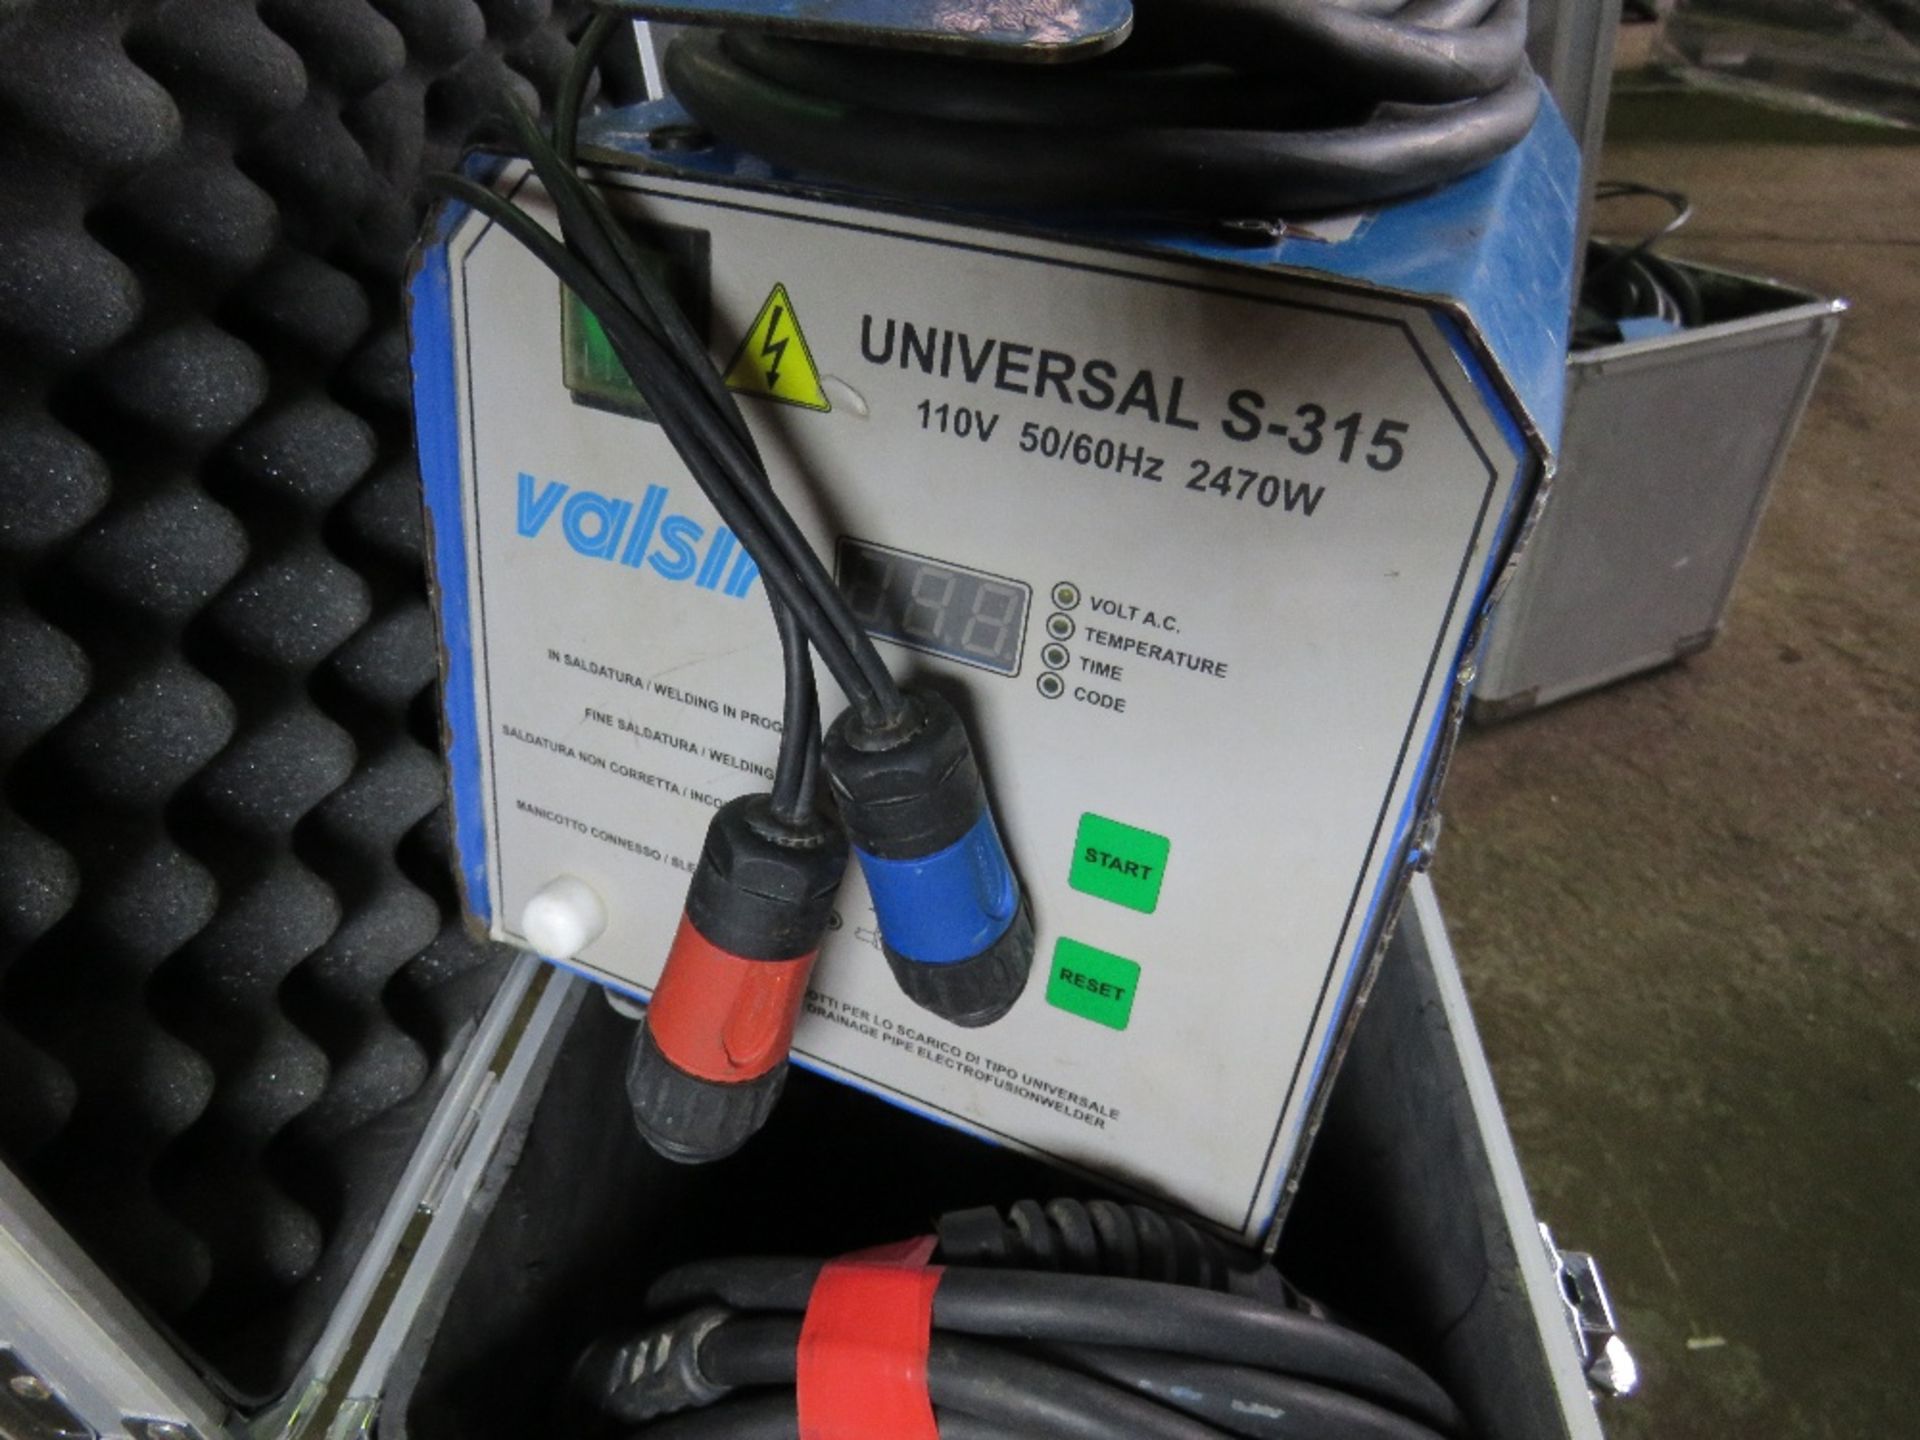 1 X UNIVERSAL S-315 110VOLT 2470W DRAINAGE PIPE FUSION WELDER UNIT. IN CASE WITH CABLES ETC. - Image 2 of 4